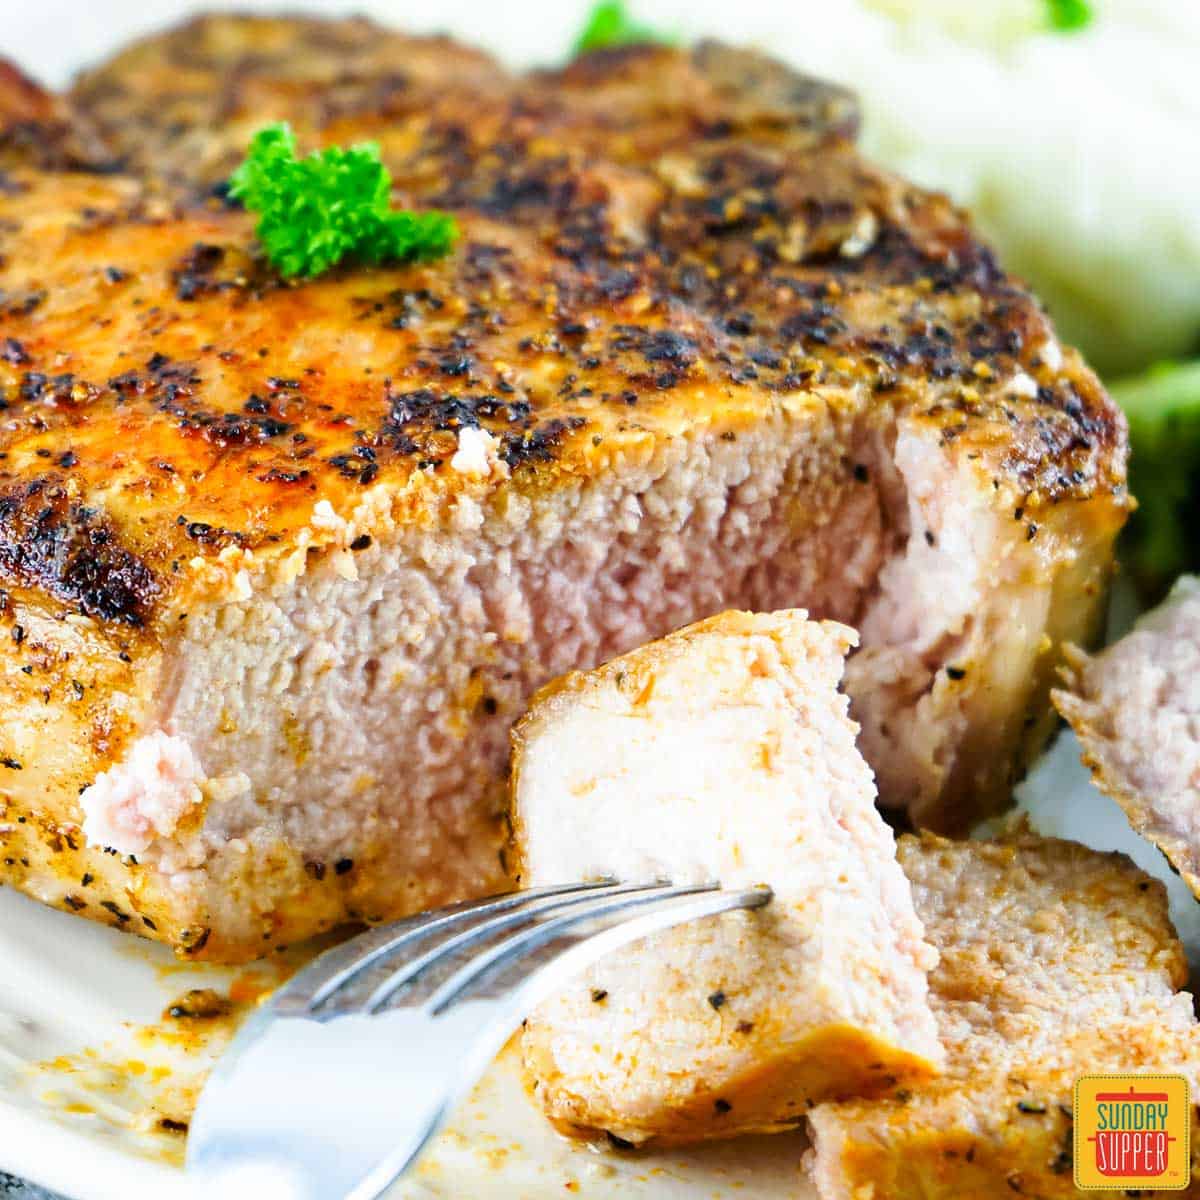 Grilled pork chop sliced on a plate with a fork